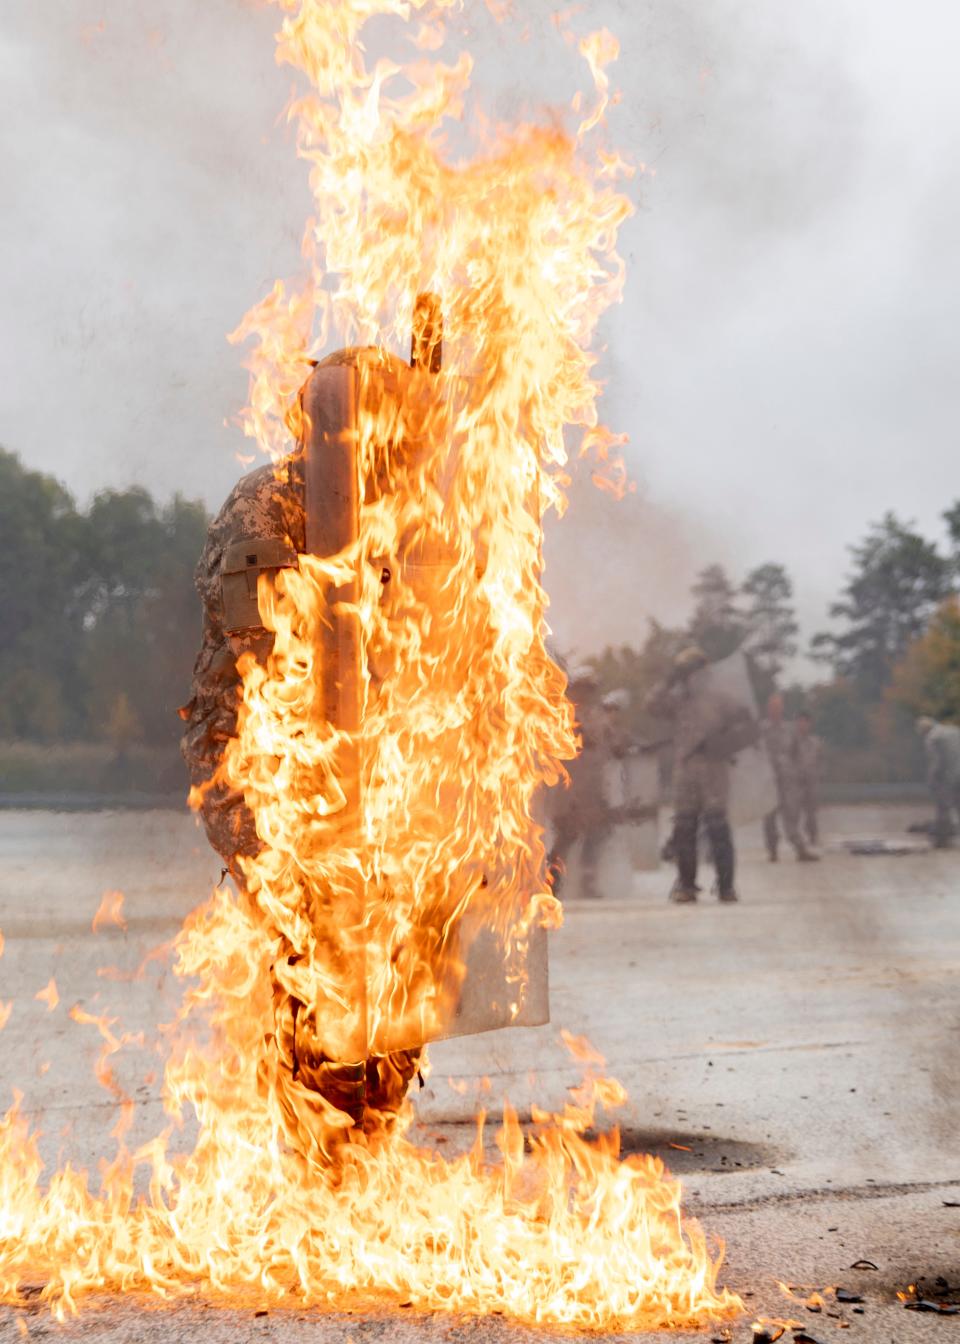 An image of a soldier engulfed in flames.